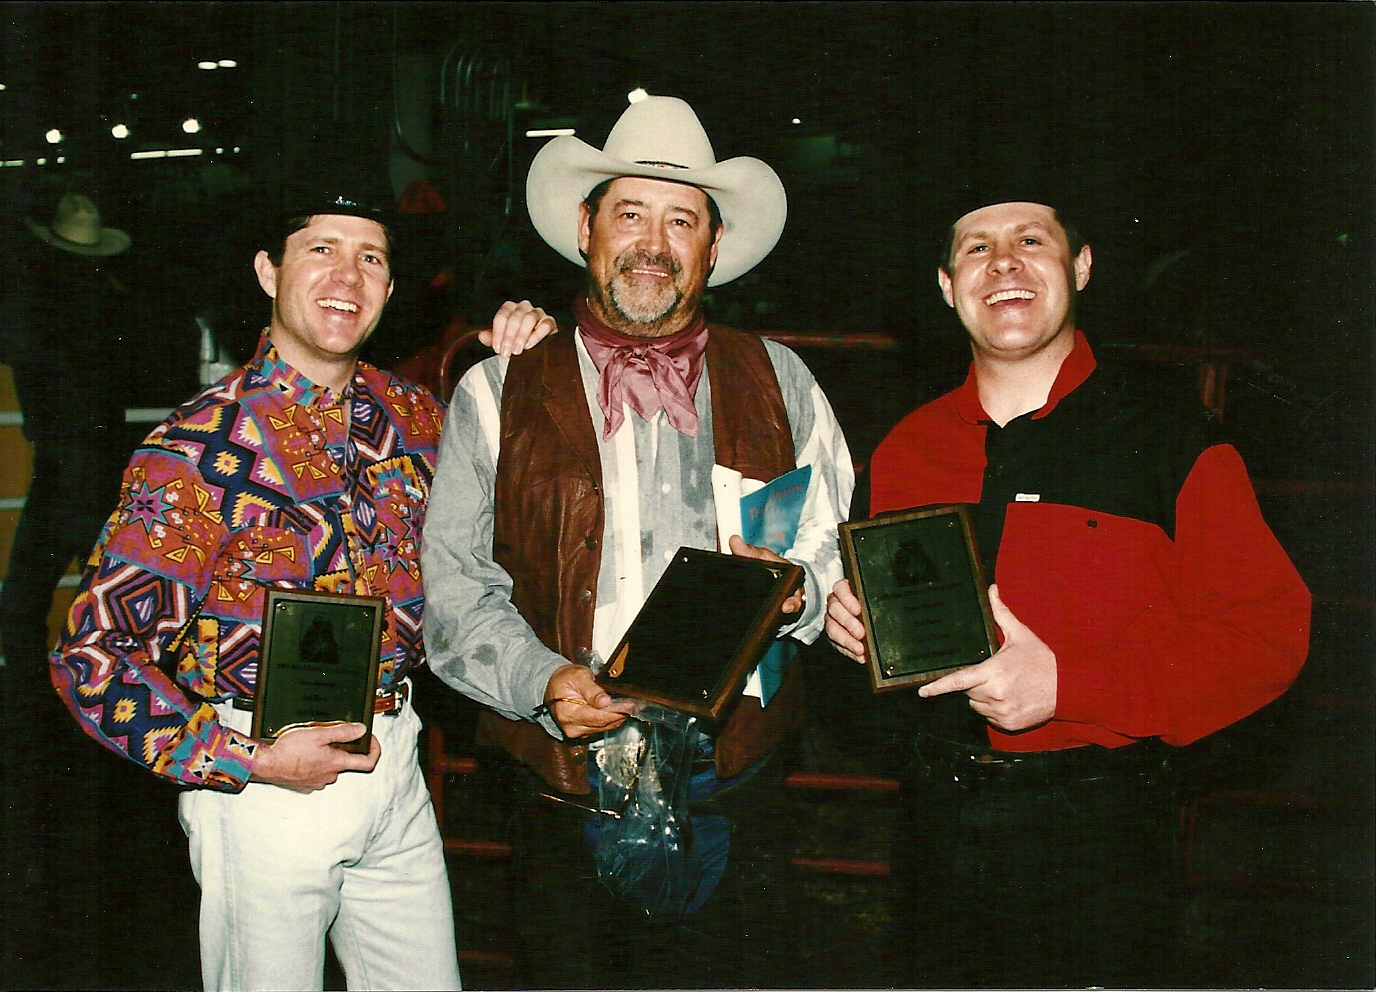 Barry Corbin with the Brothers at the Ben Johnson Celebrity Roping and Penning.